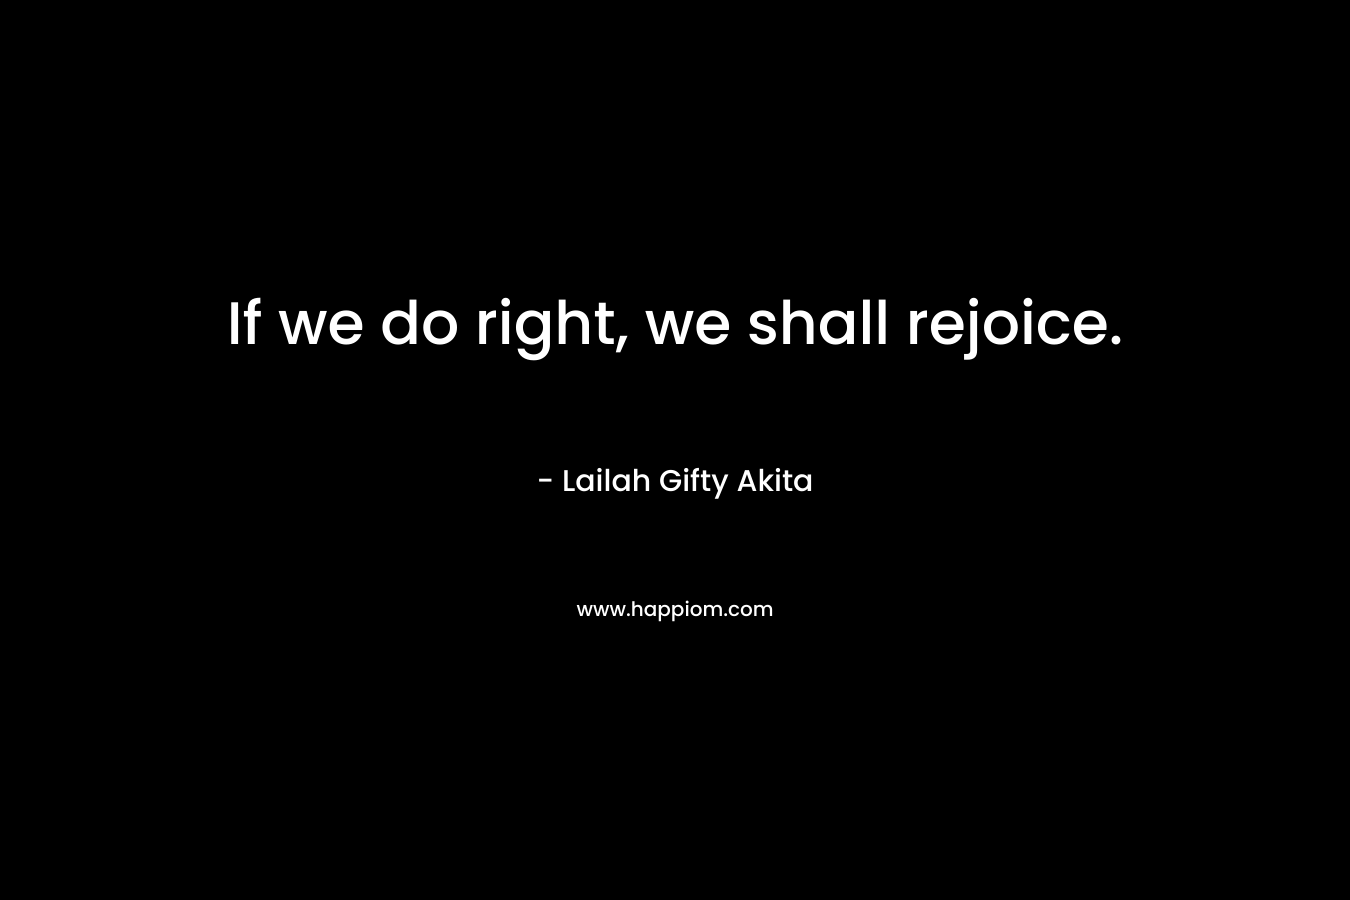 If we do right, we shall rejoice. – Lailah Gifty Akita